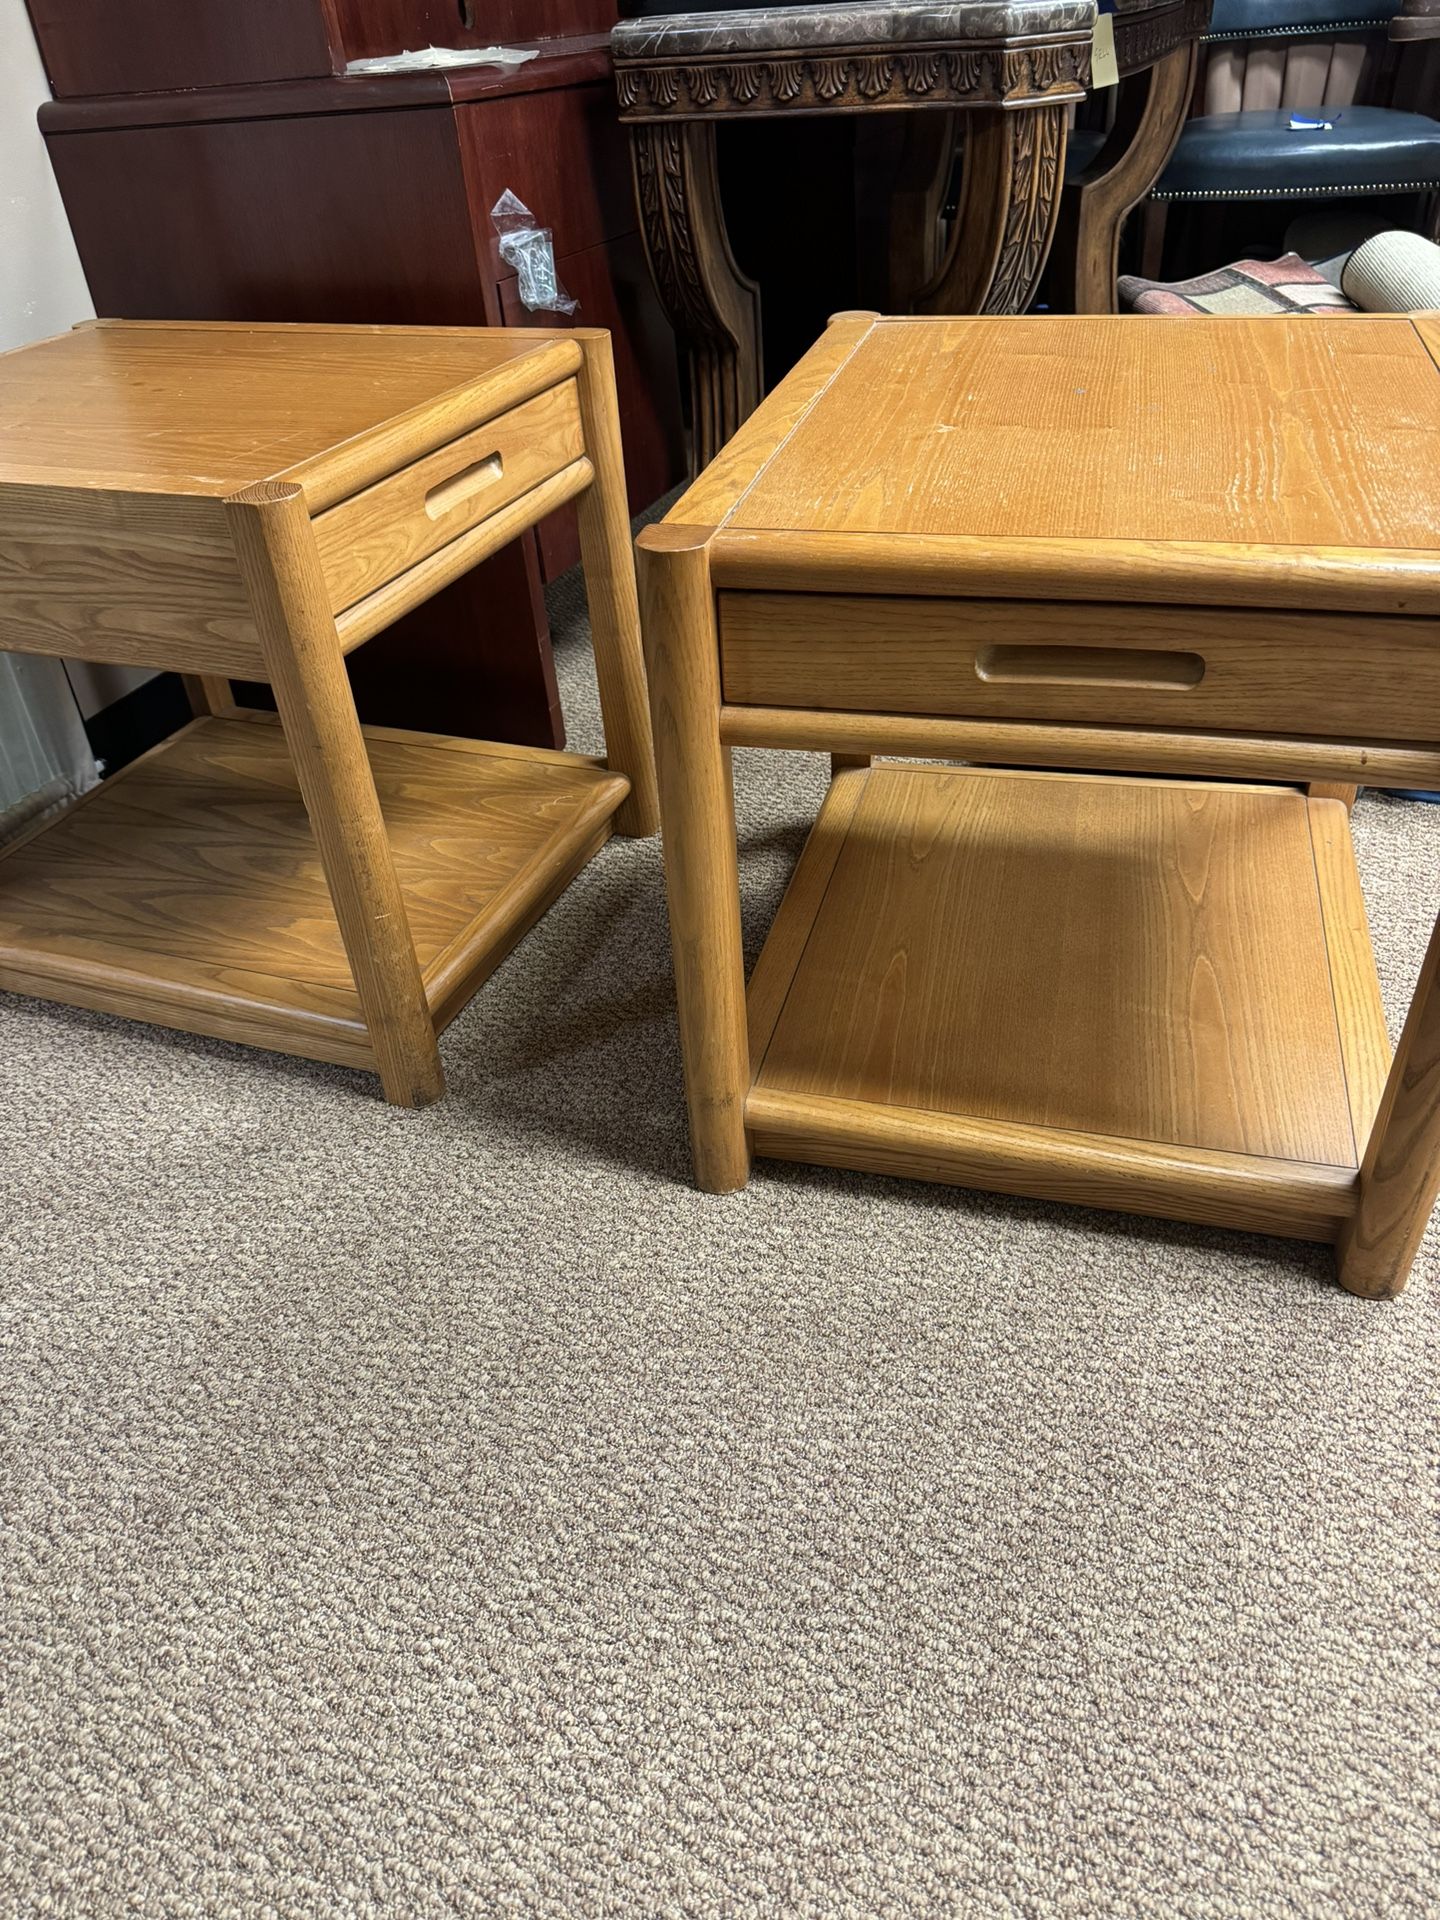 Pair Of End Tables/Night Stands With Drawers $20 CASH